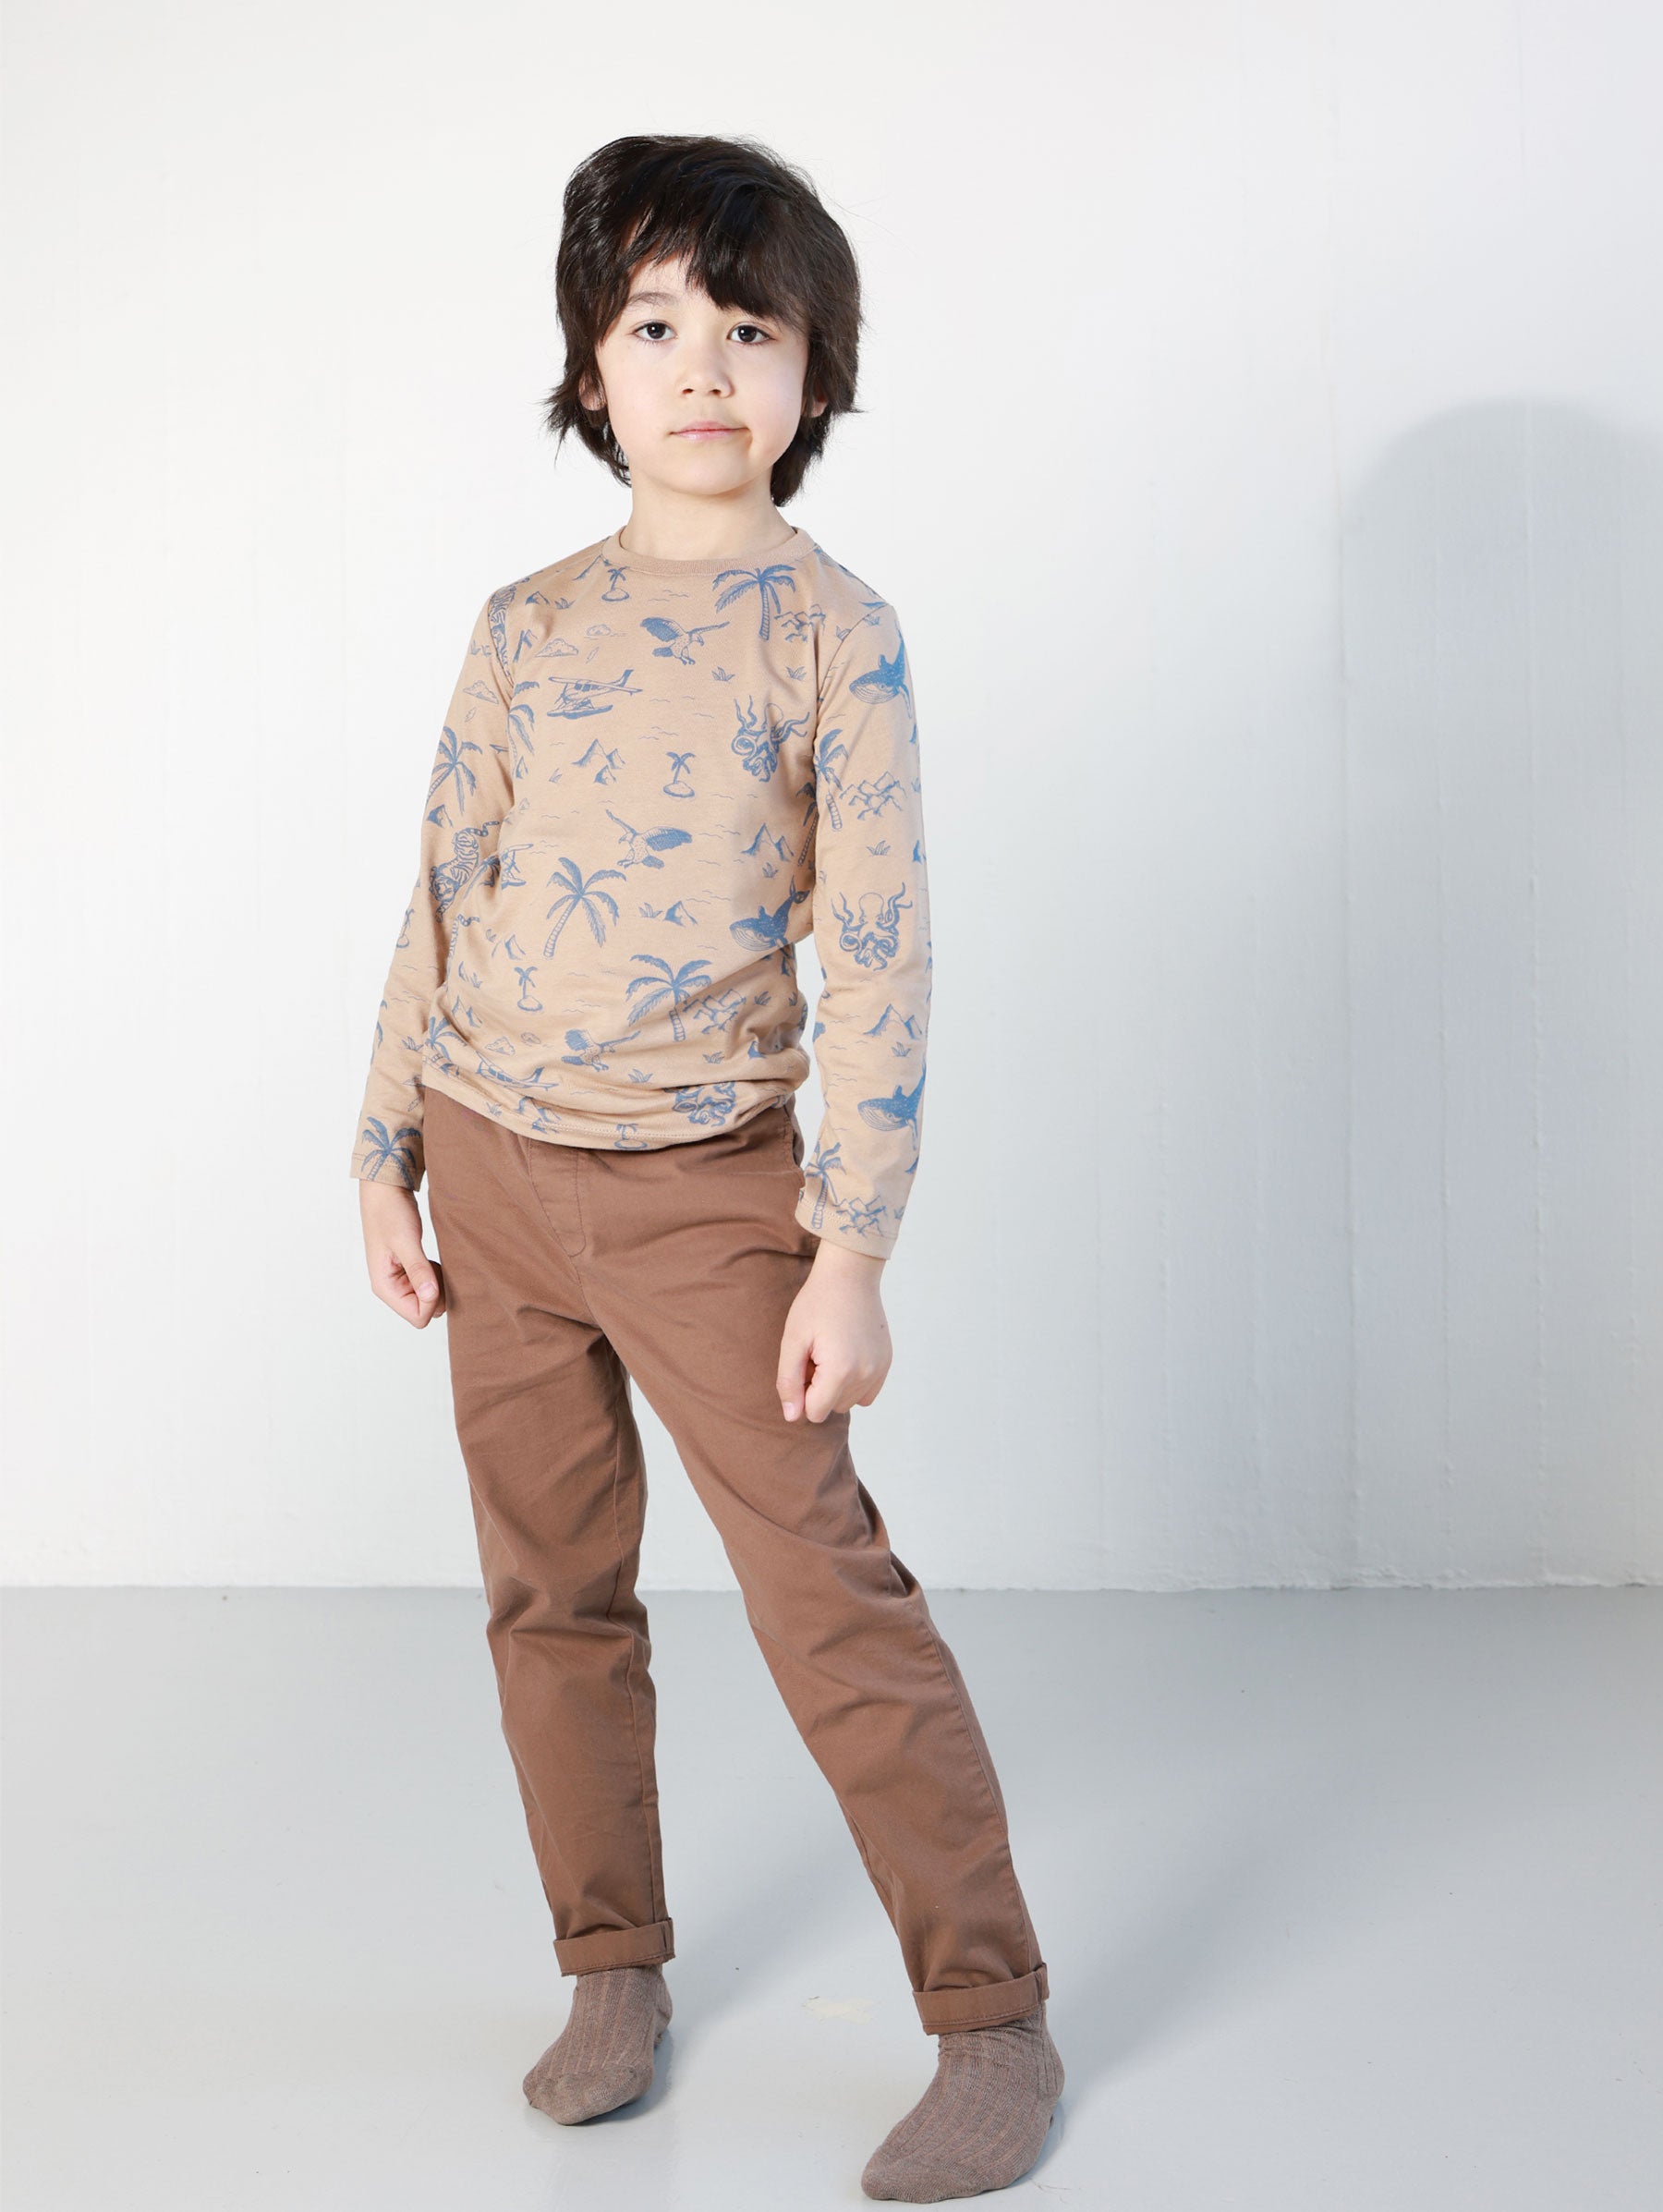 One We Like - Organic clothes for babies and children